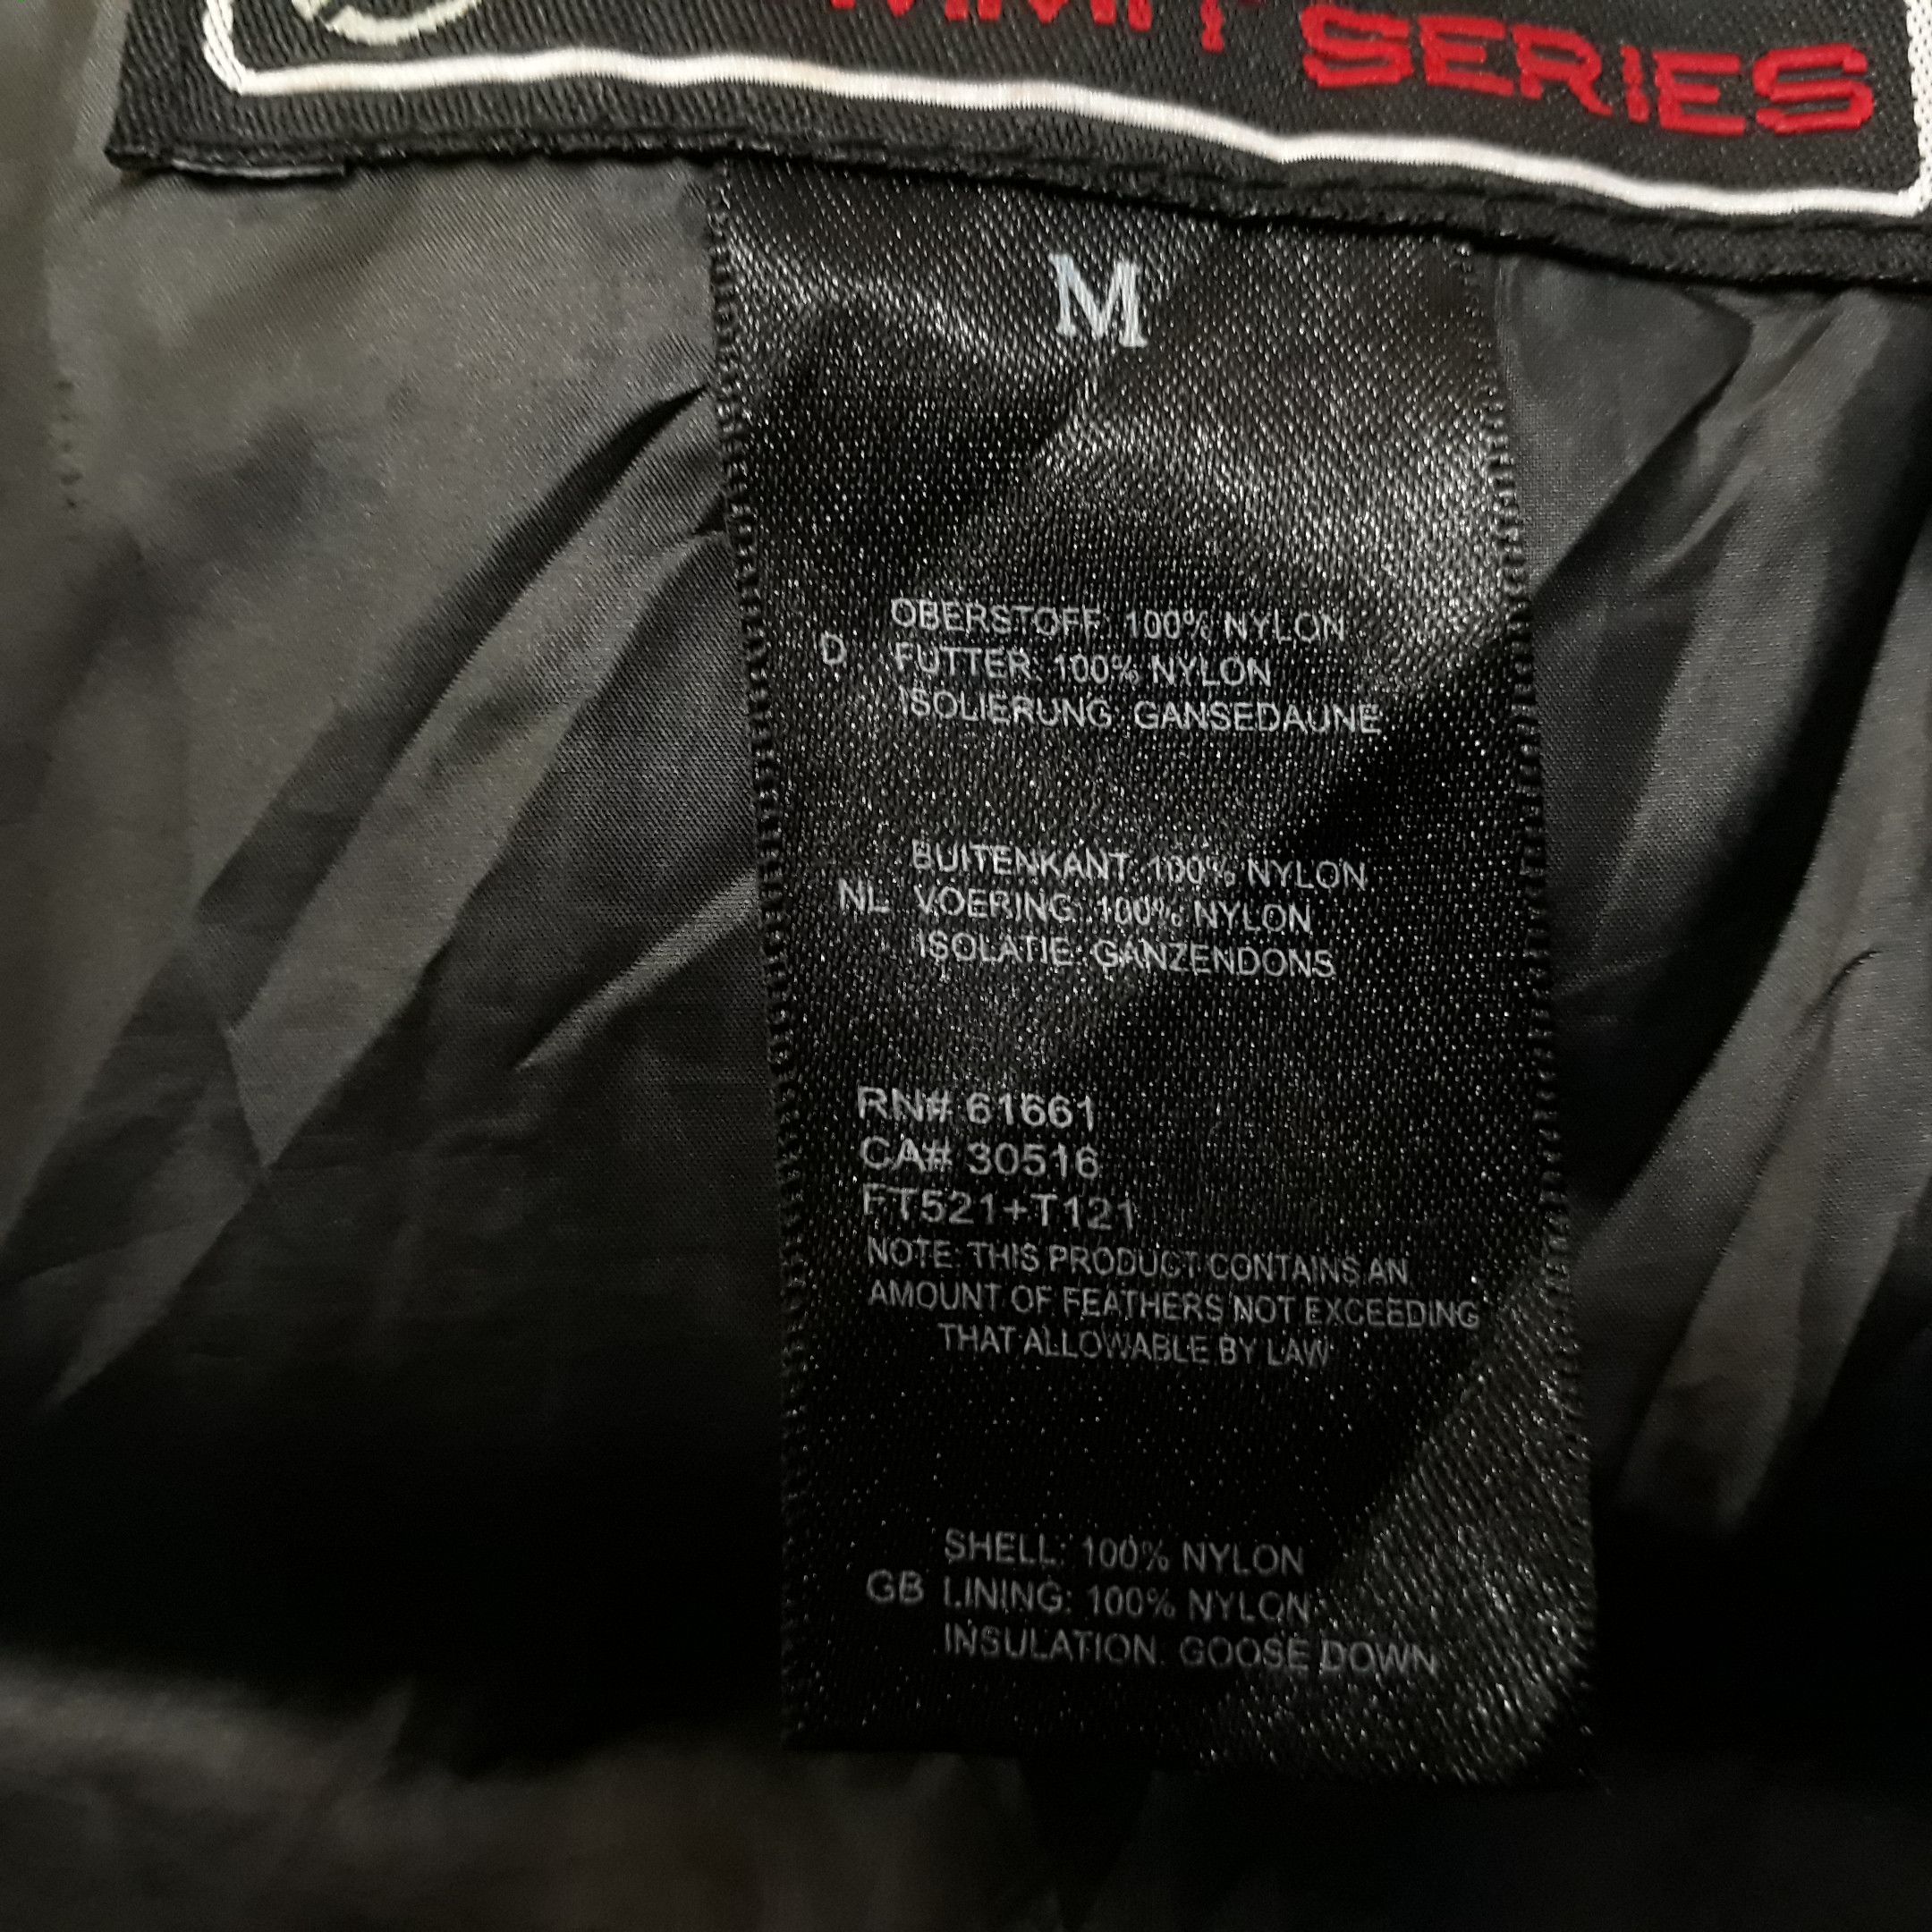 The North Face The North Face Limited Edition Winter 2011 Goose Down Summit Series 850Ltd Puffer Quilted Bomber Jacket Hoodie Size US M / EU 48-50 / 2 - 7 Preview